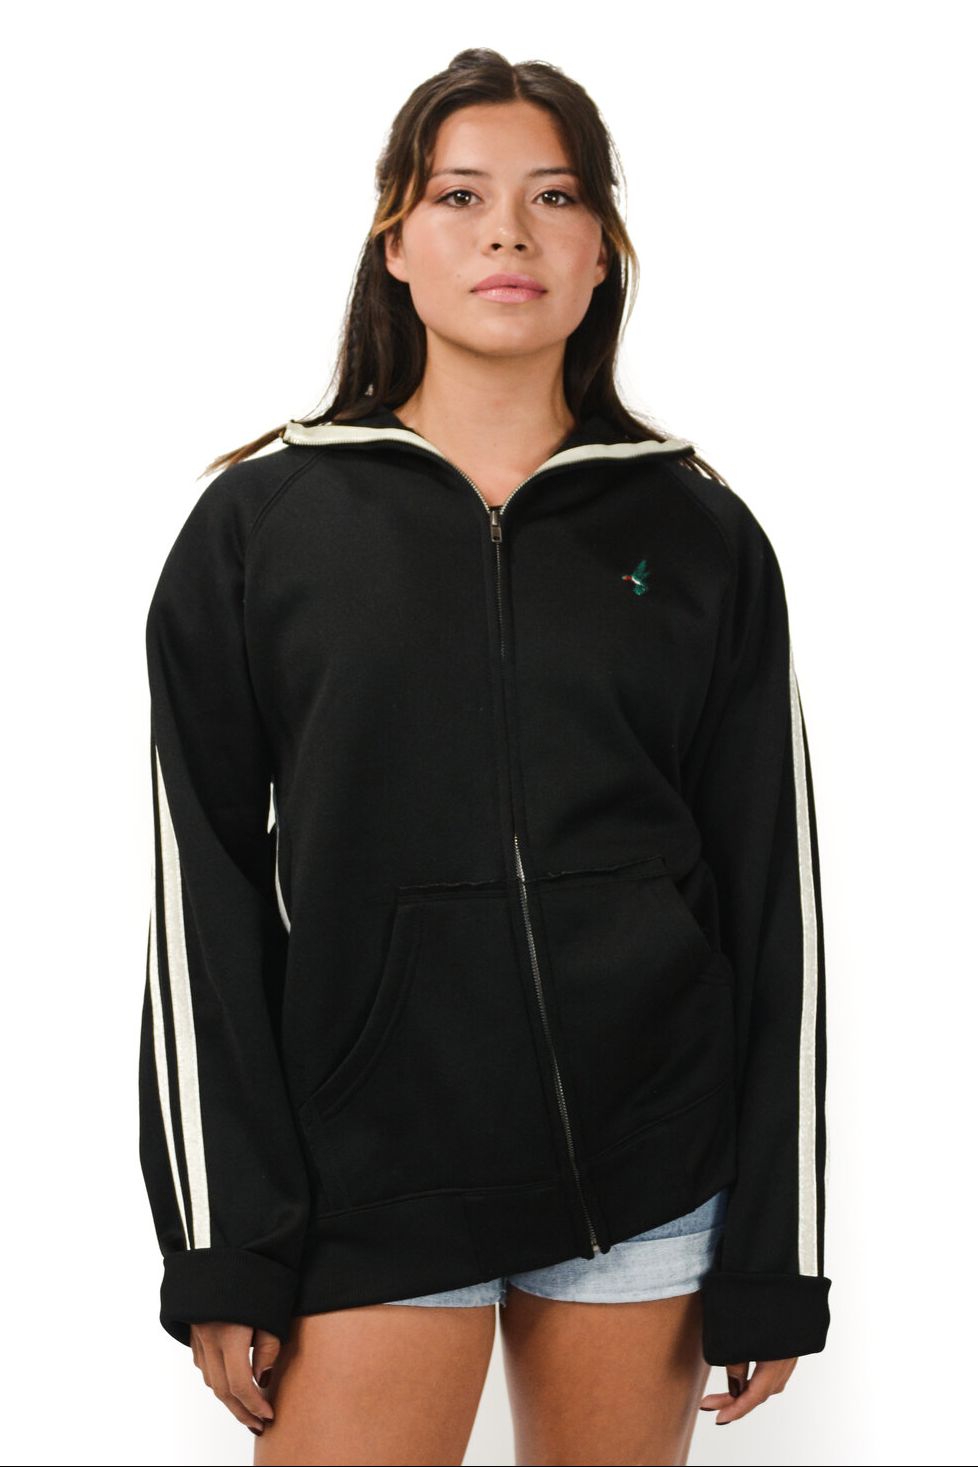 For the Next Leaders Hummingbird Track Jacket